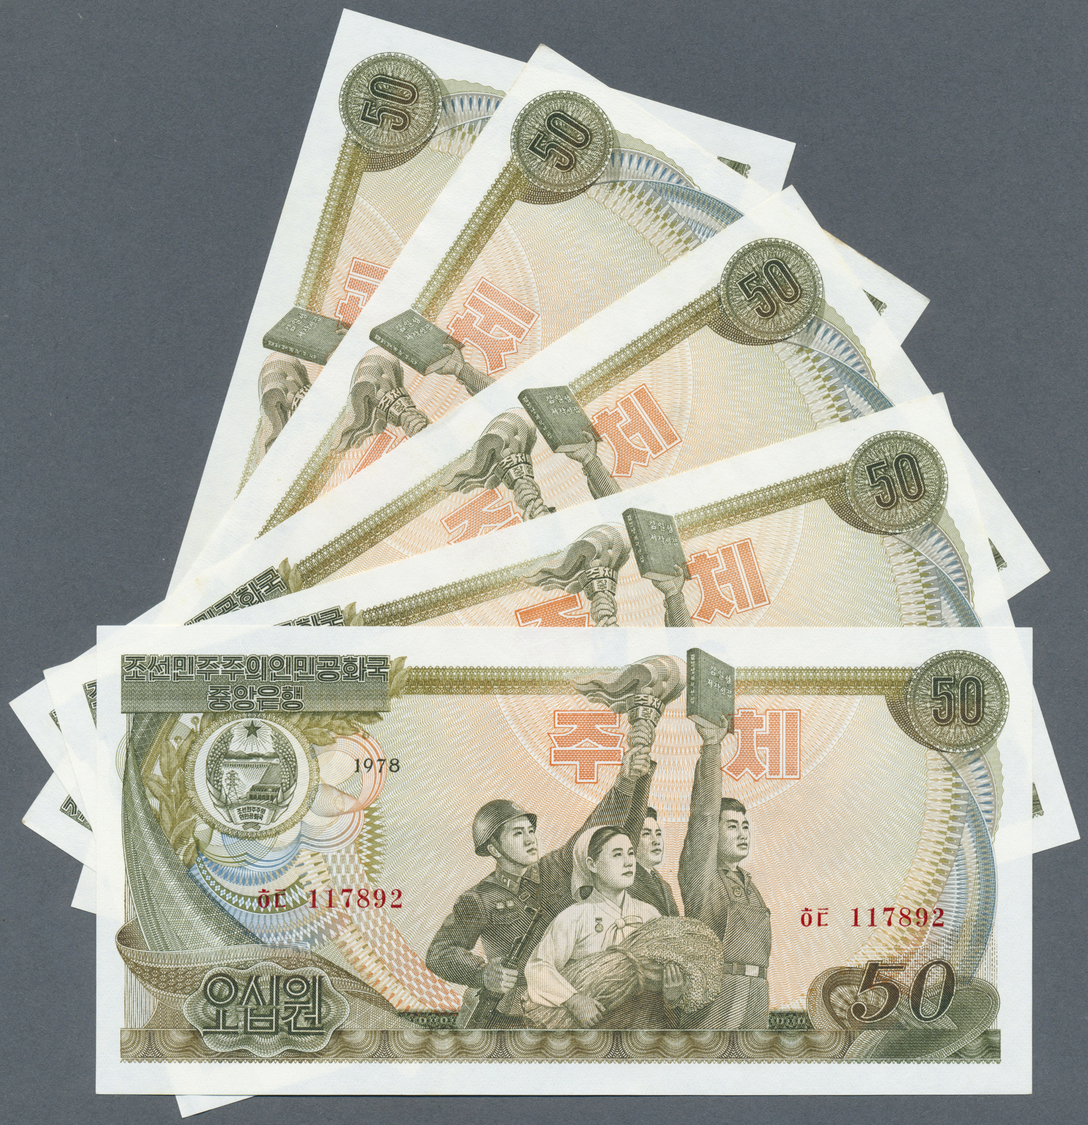 01353 Korea: 5 sets containing 1 Won to 50 Won 1978 P. 18-21 type a,b,c,d and e, 20 notes in total in condition: aUNC an